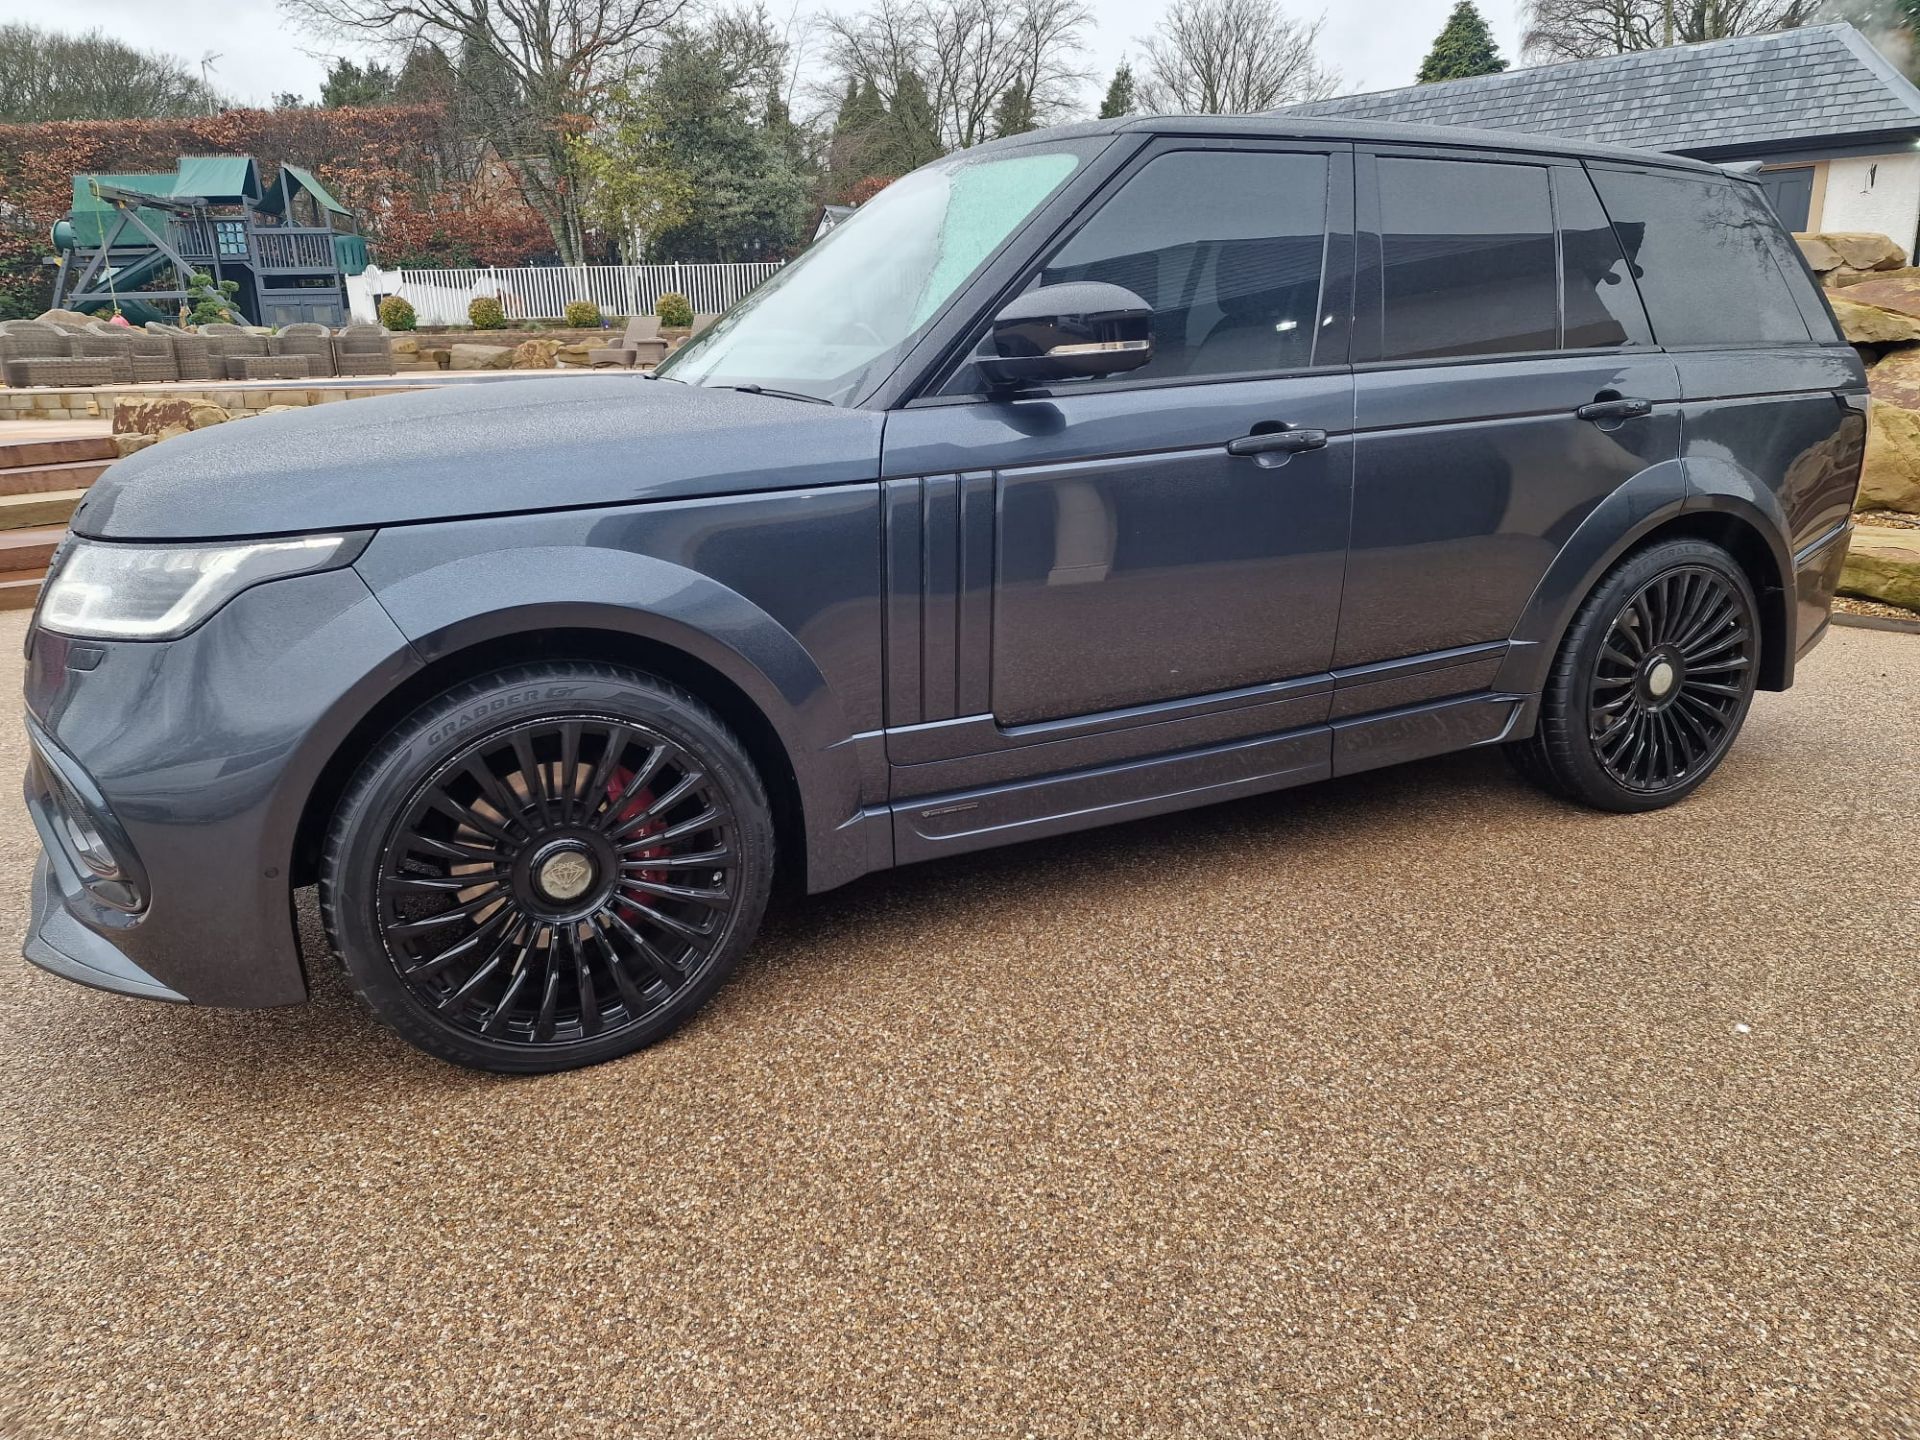 2018/68 RANGE ROVER SV AUTOBIOGRAPHY DYN V8 SC AUTO - £40K WORTH OF ONYX BODY KIT AND CONVERSION - Image 9 of 77